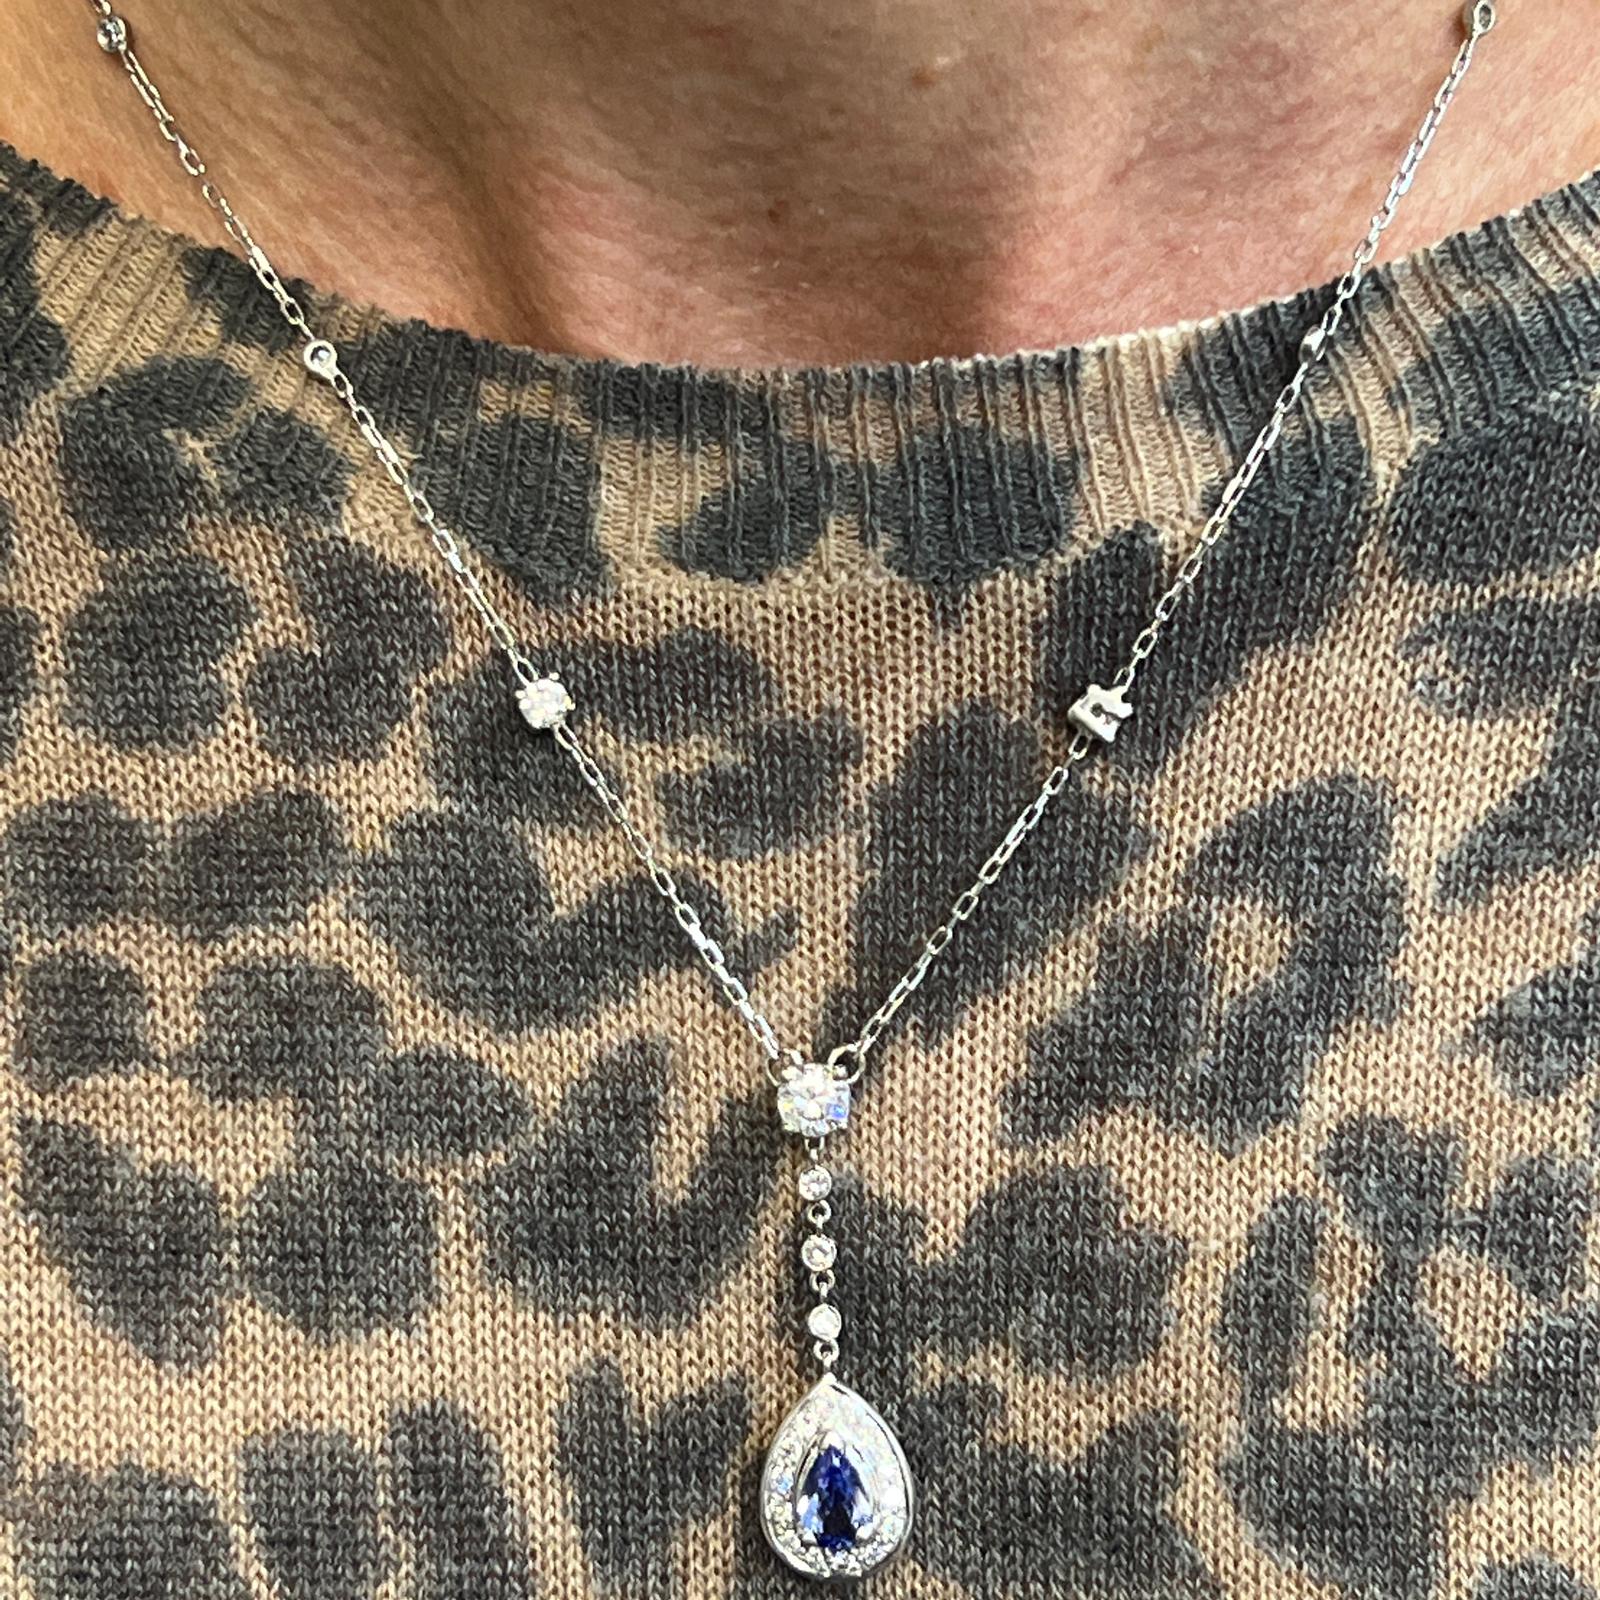 Diamond and tanzanite drop necklace fashioned in 14 karat white gold. The necklace drop features an .81 carat pear shape tanzanite gemstone surrounded by a halo of round brilliant cut diamonds. A 1/2 carat round brilliant diamond is set at the